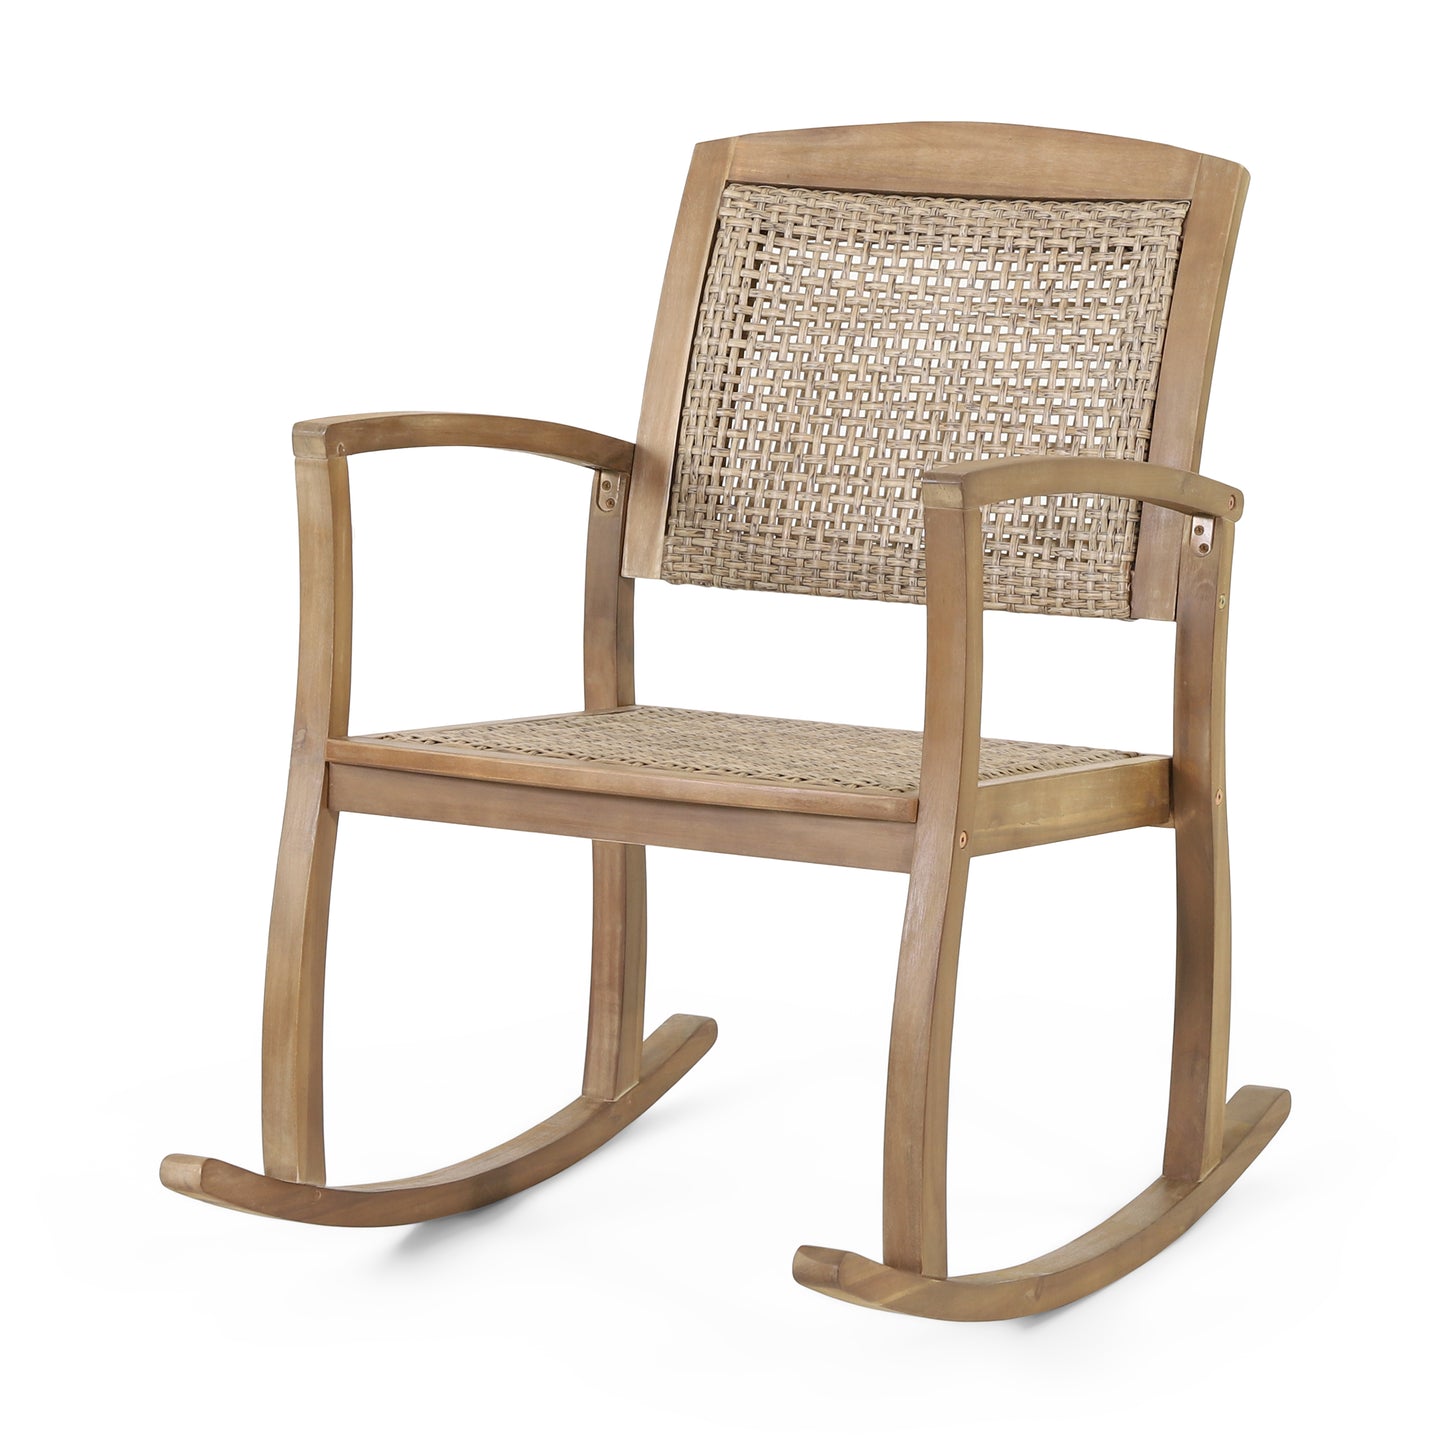 Uintah Outdoor Acacia Wood and Wicker Rocking Chair, Light Brown